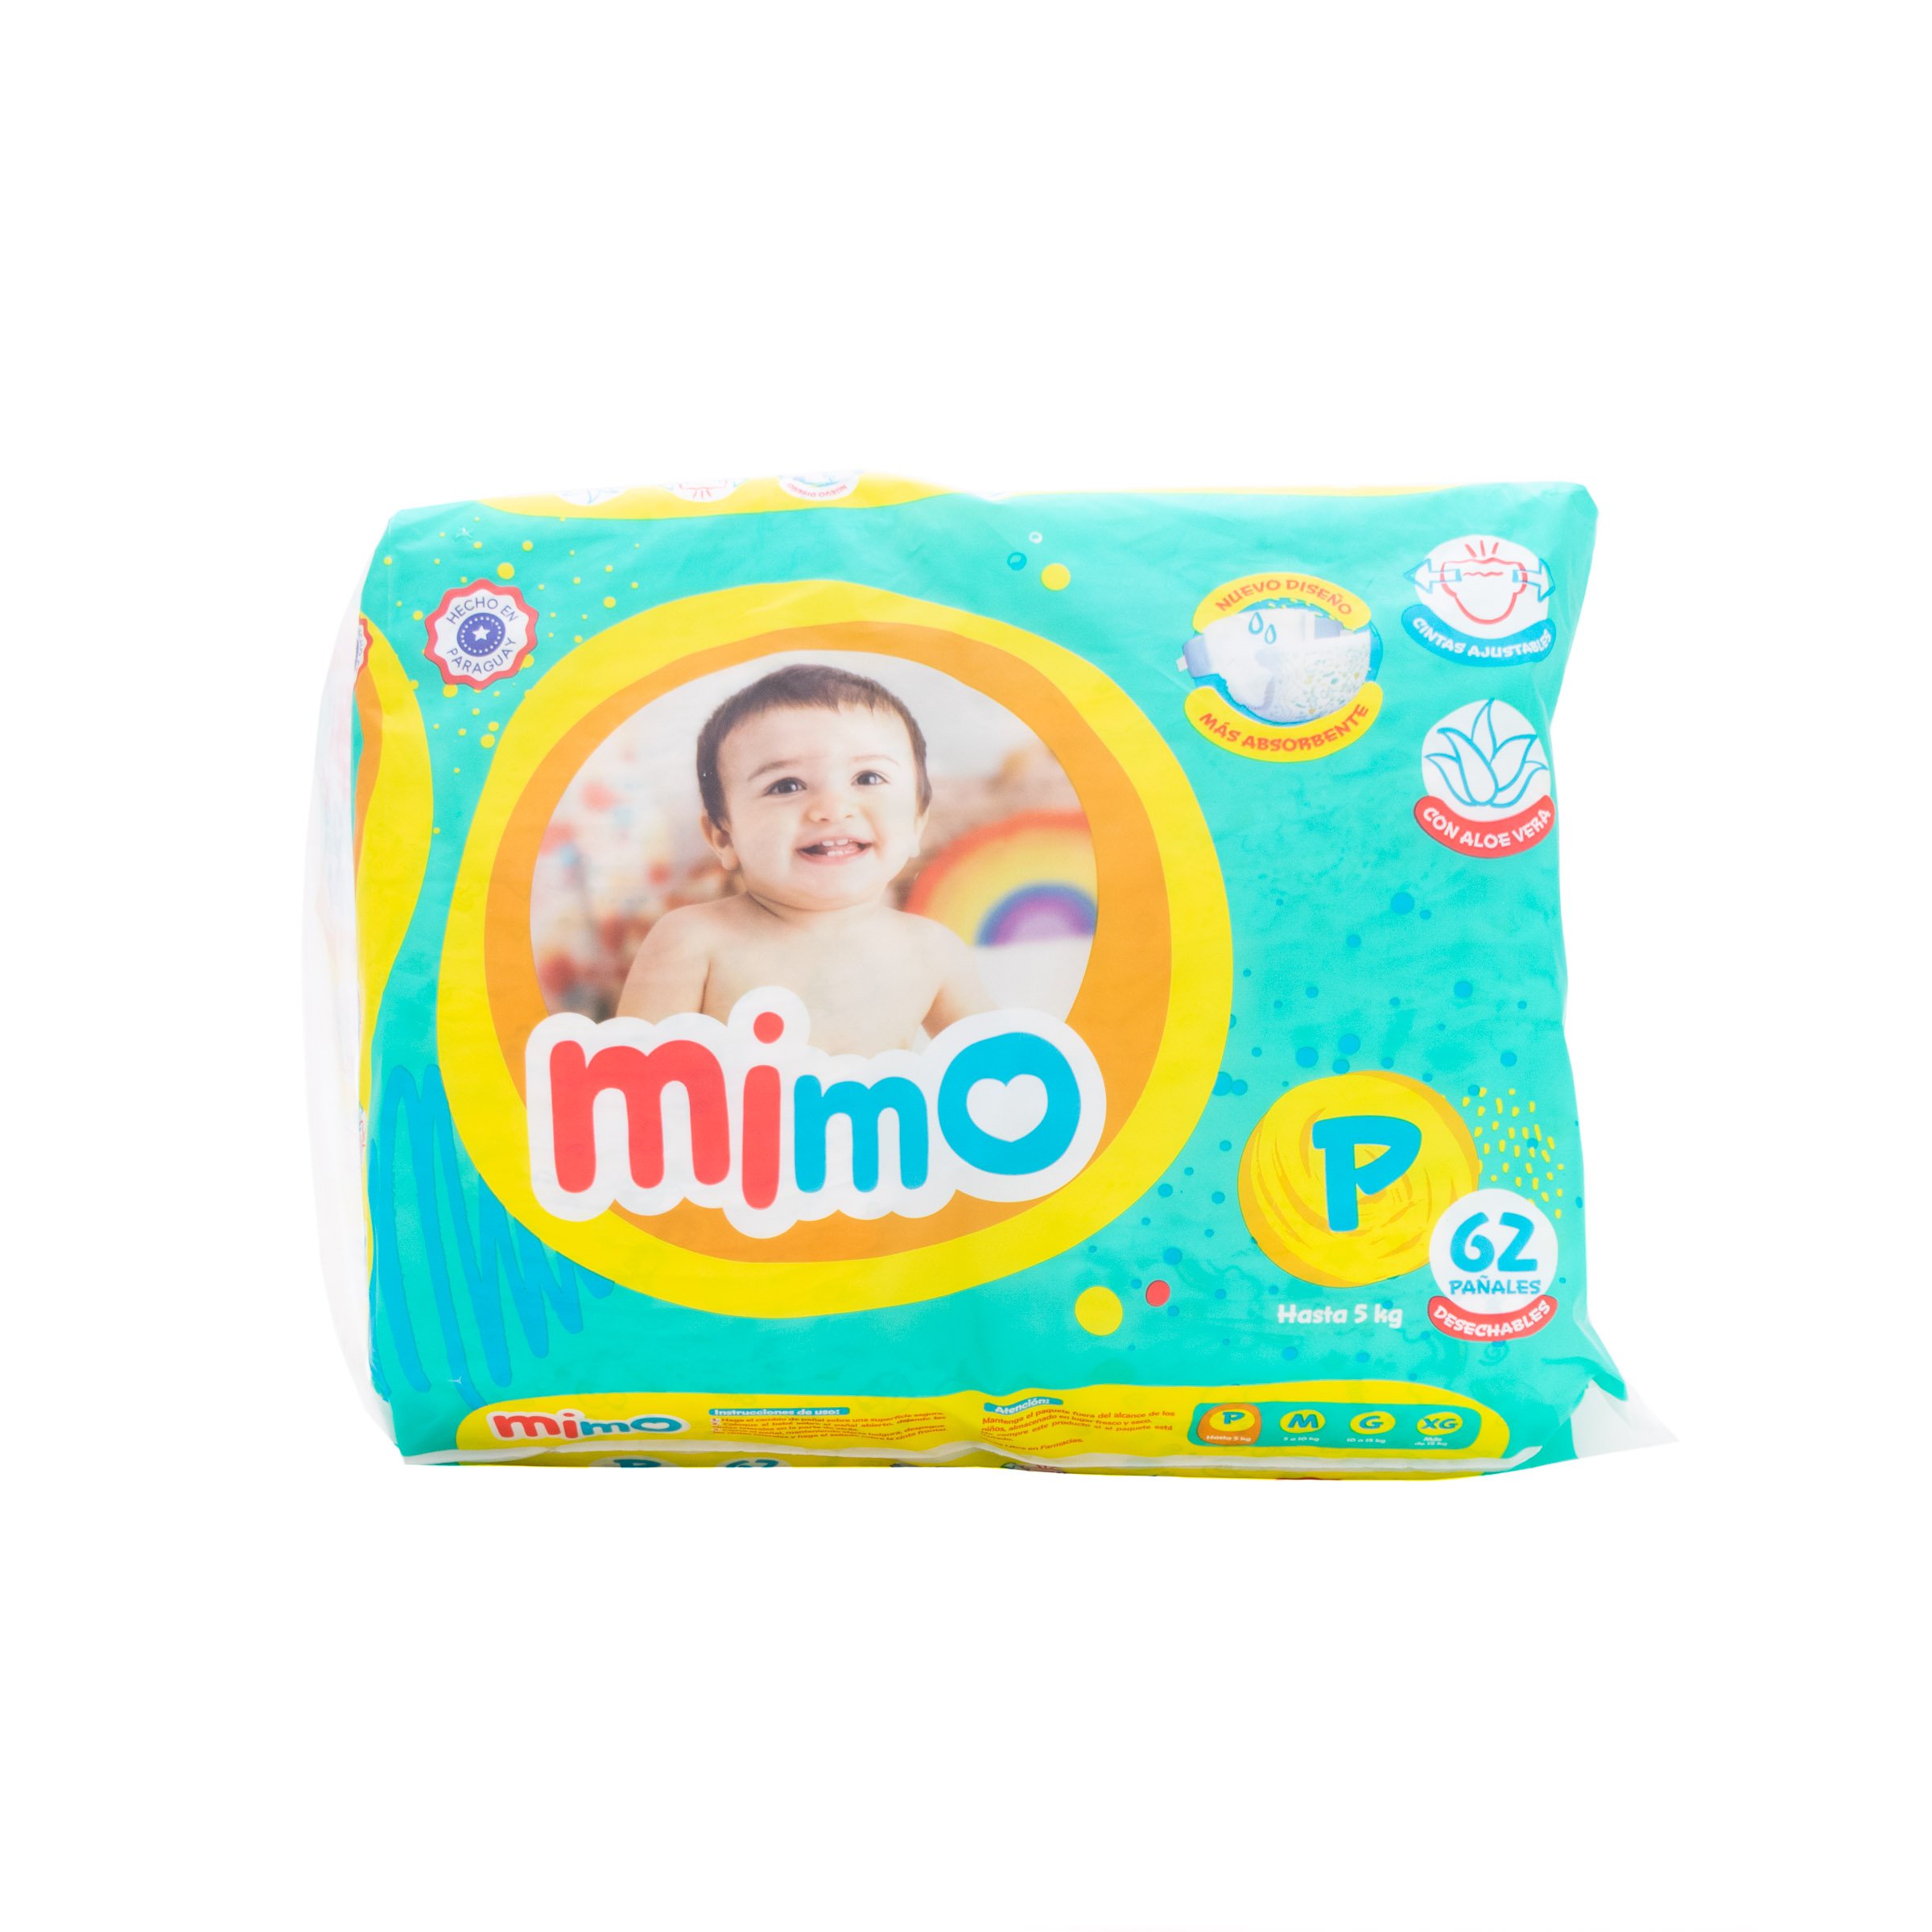 MIMO PANAL ECO P X 62 UNID